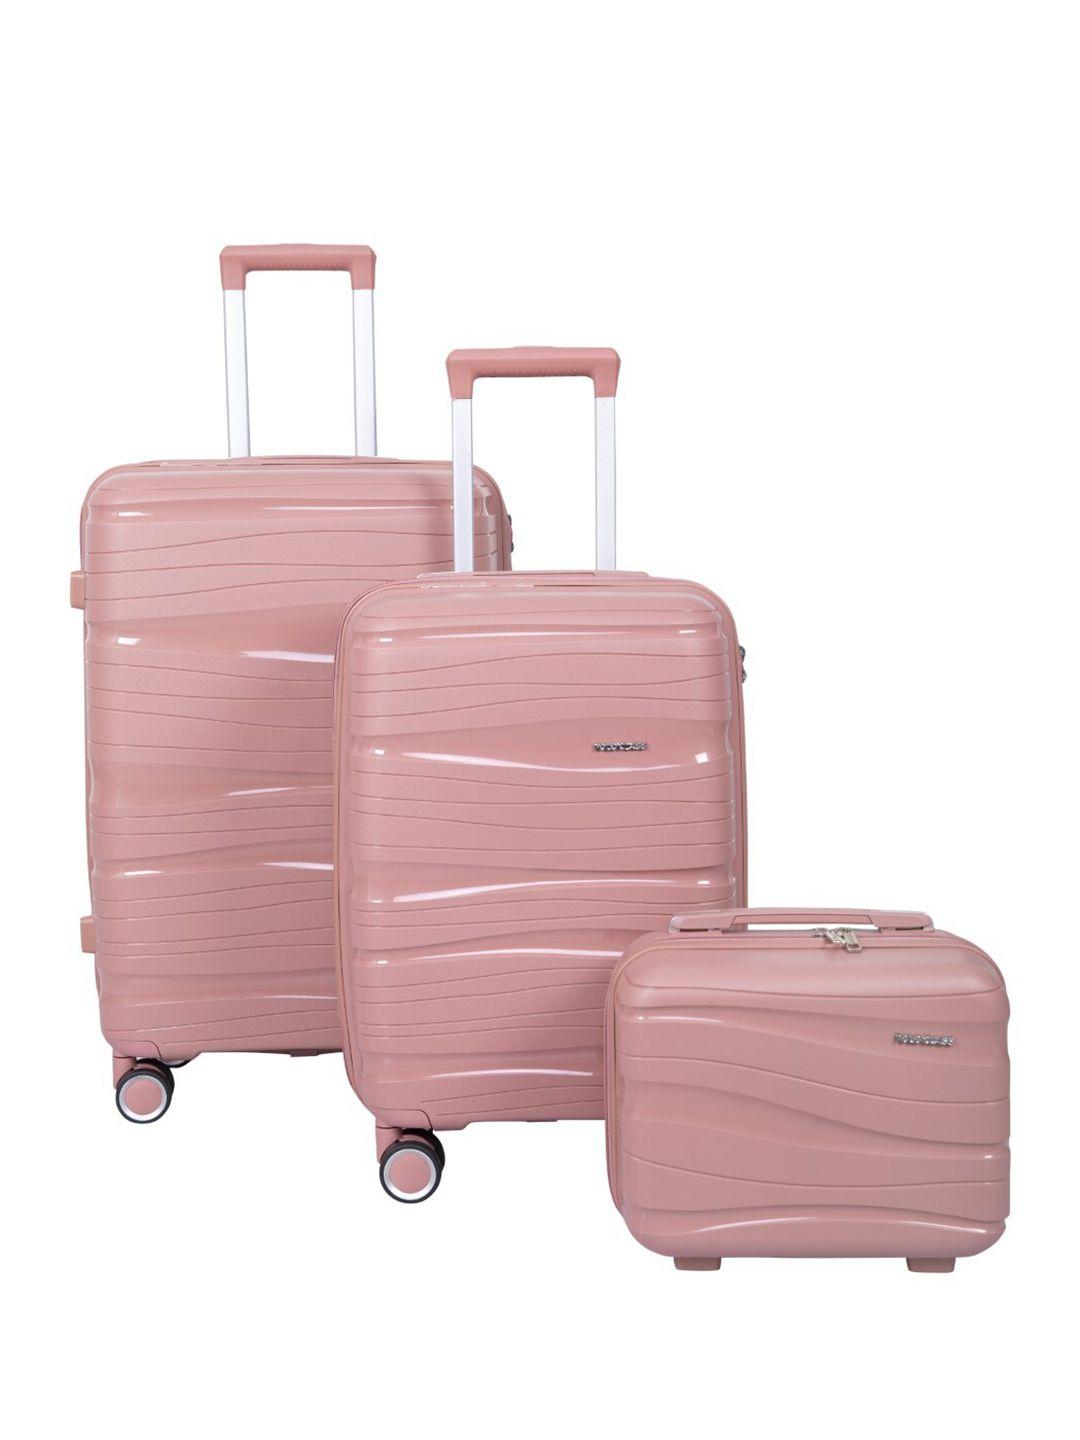 polo class set of 3 hard-sided trolley suitcases with 1 vanity bags